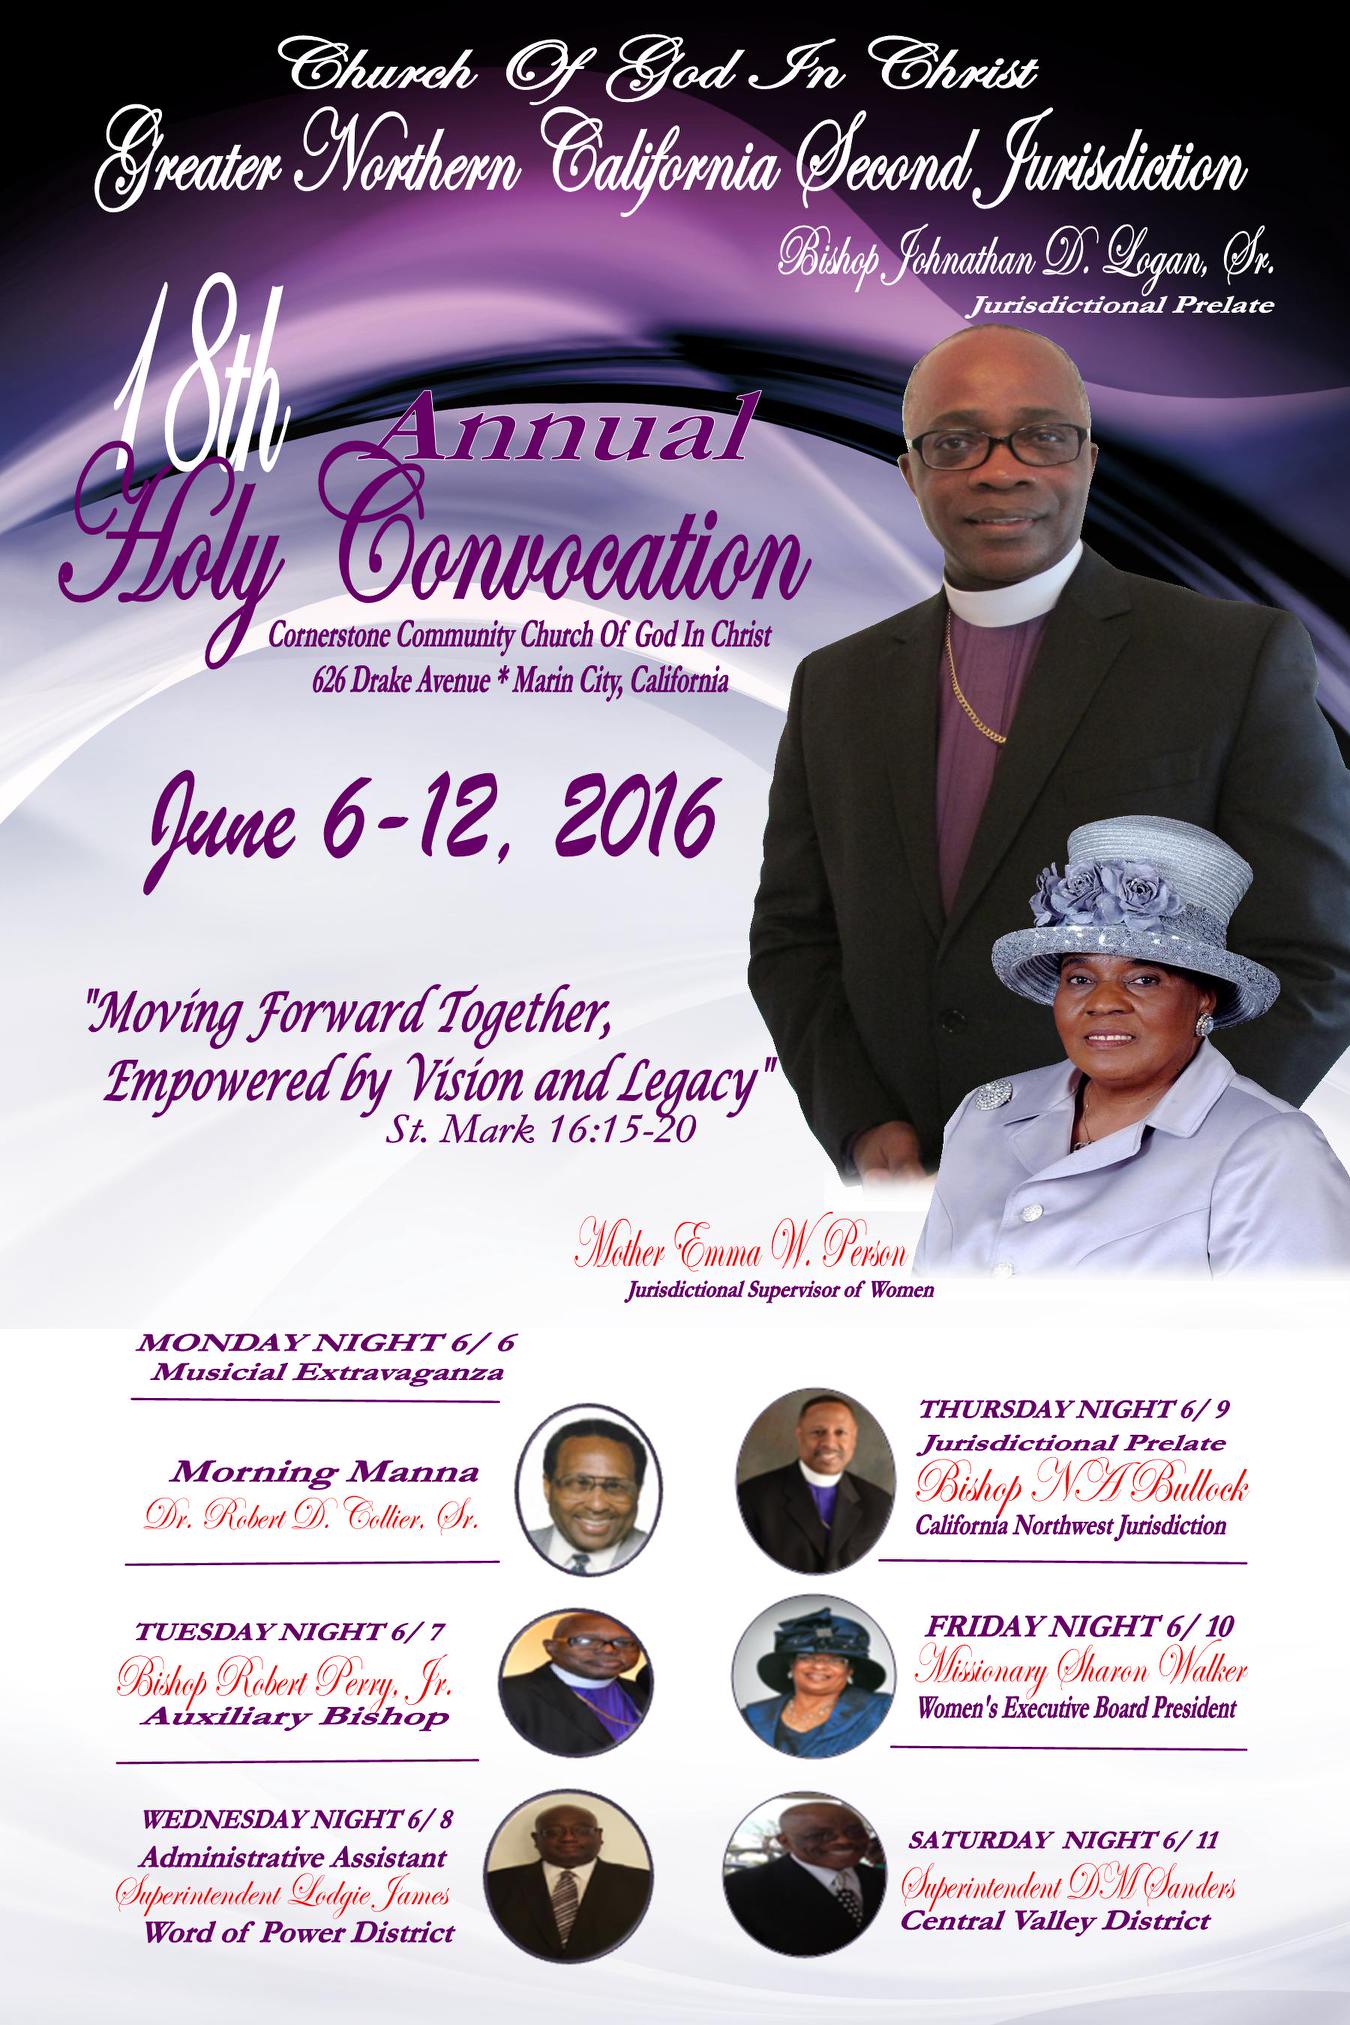 Greater Northern Second COGIC